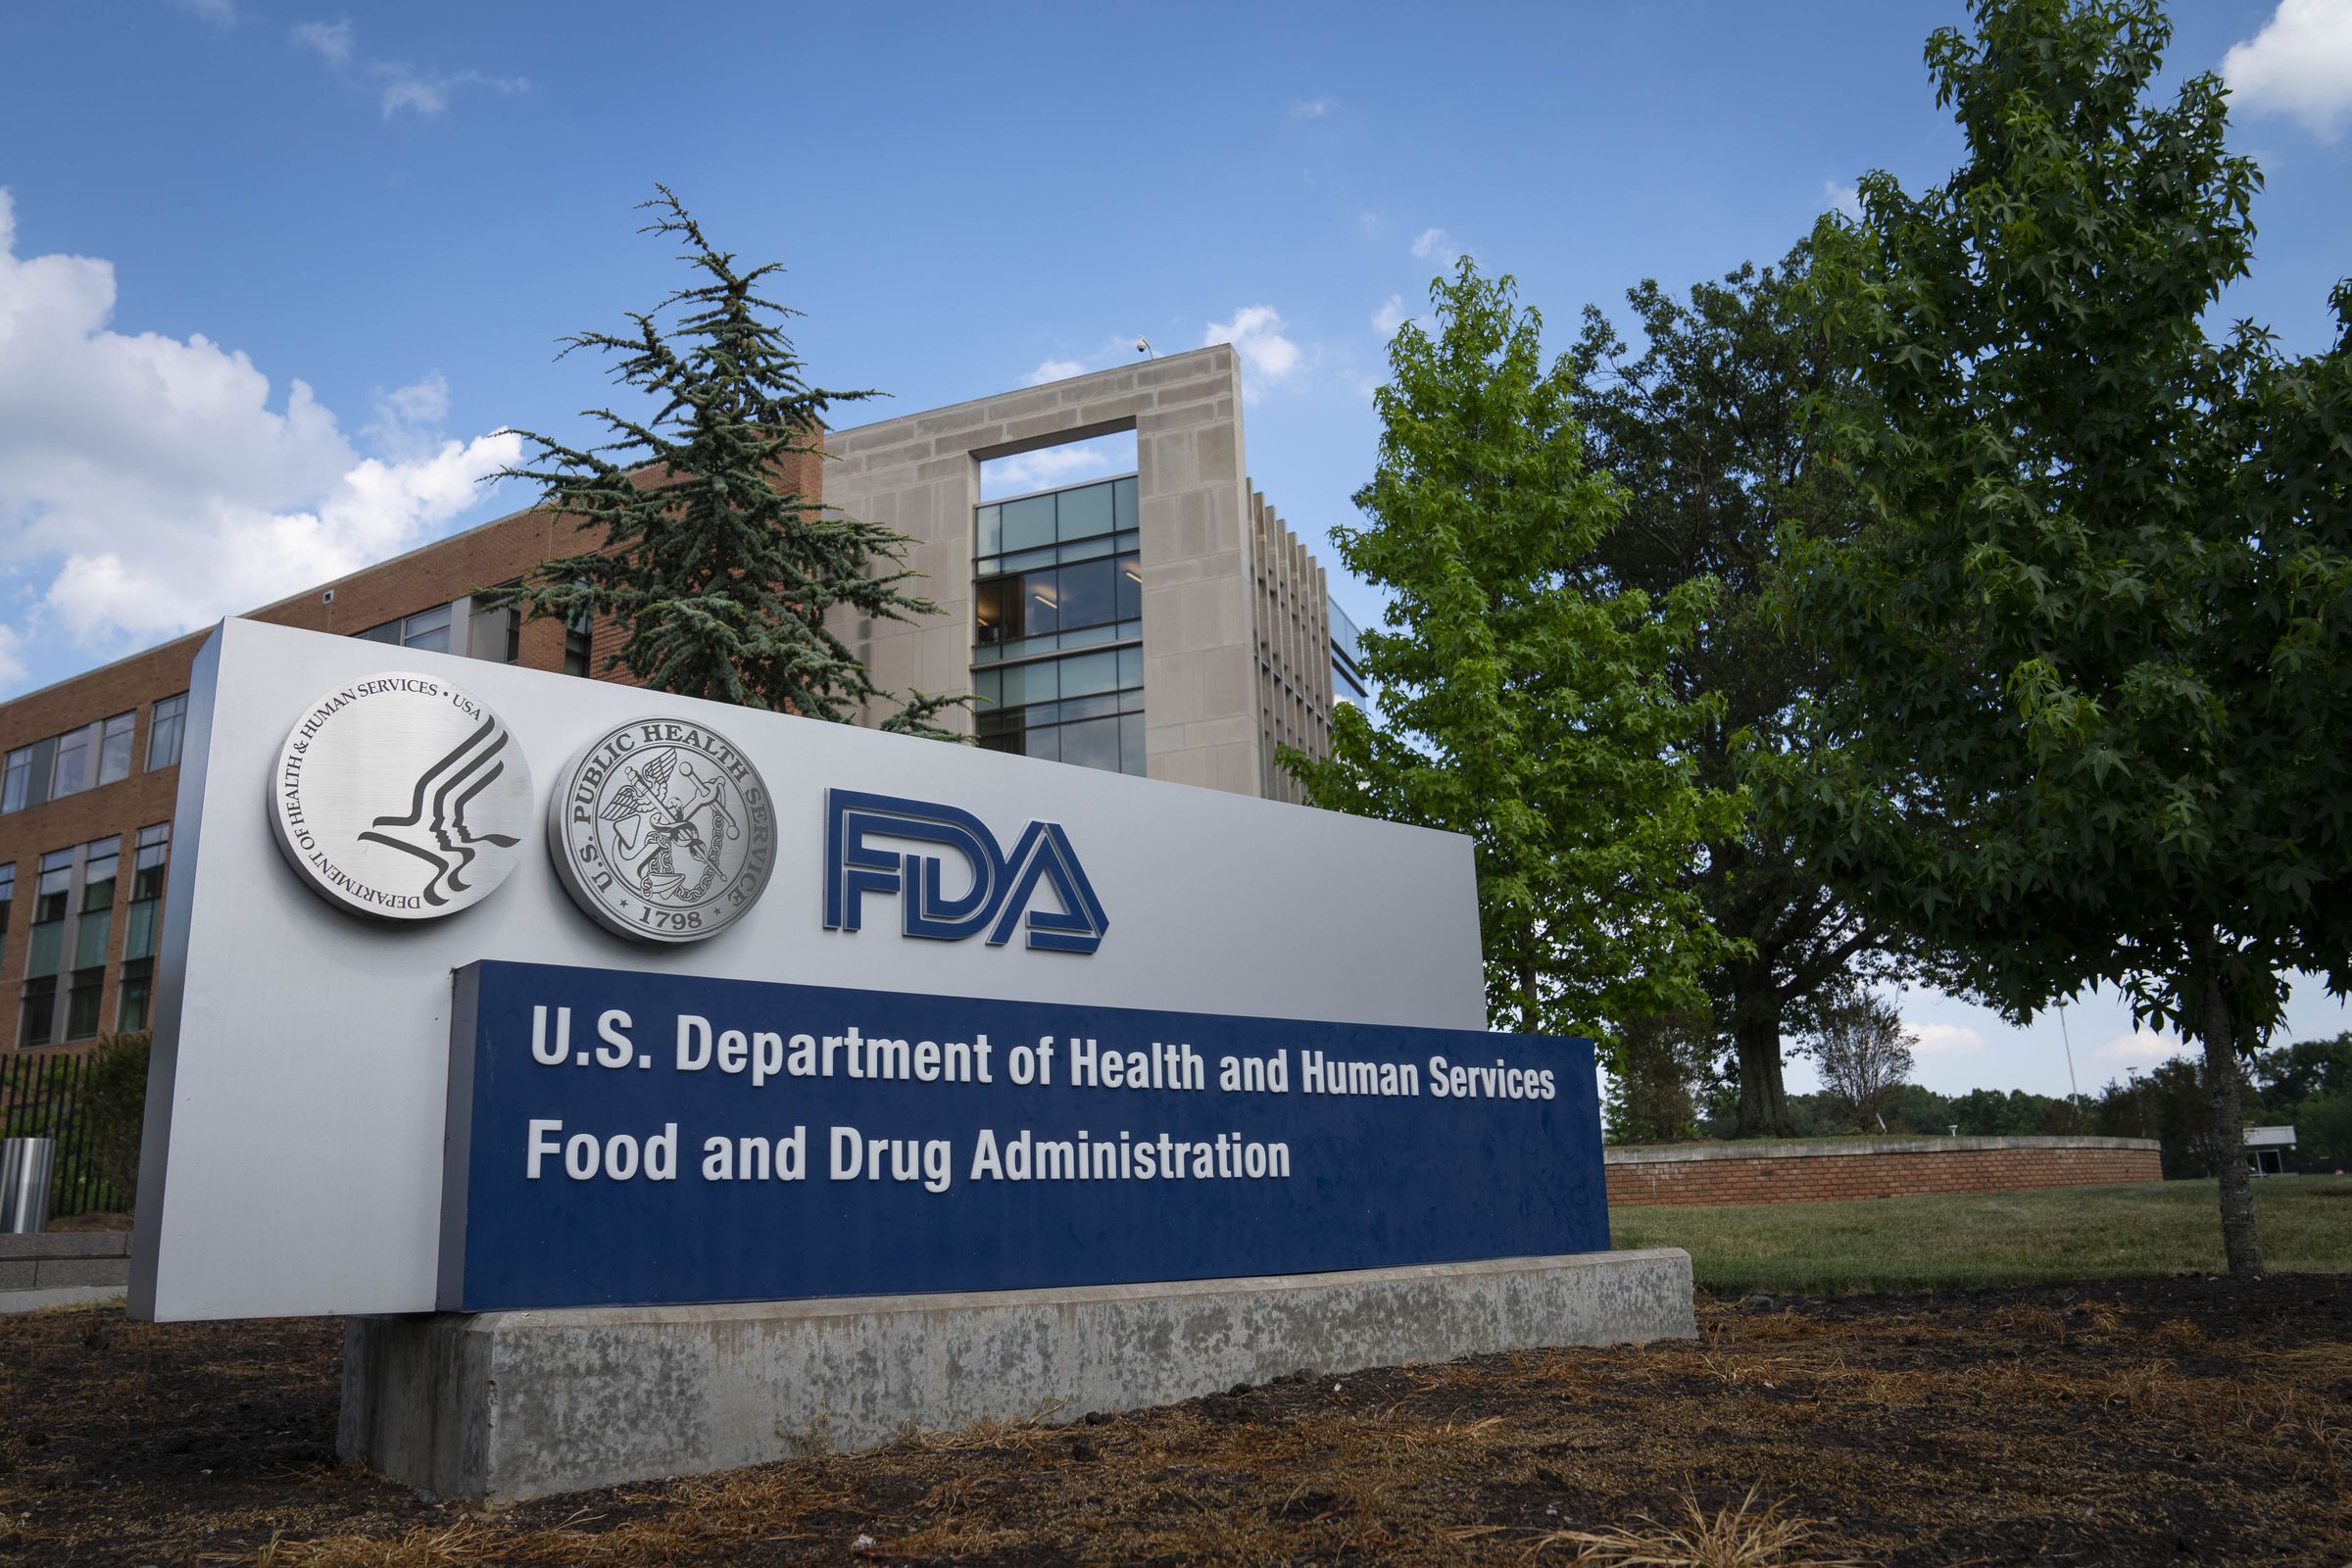 Photo of a sign outside a large building that reads “US Department of Health and Human Services, Food and Drug Administration”